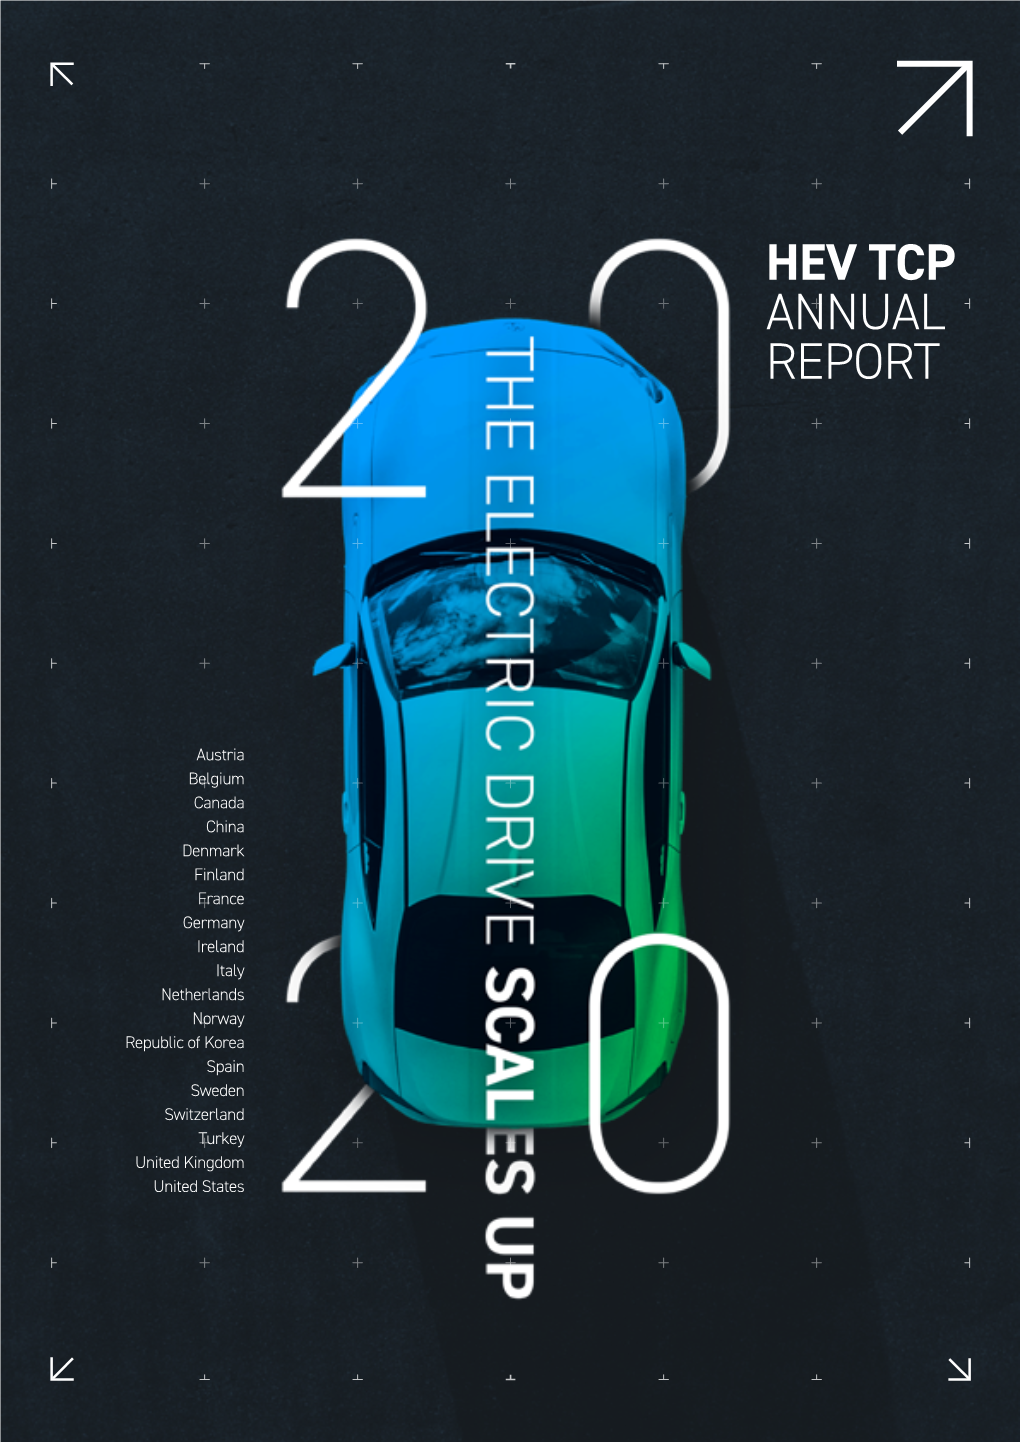 Hev Tcp Annual Report